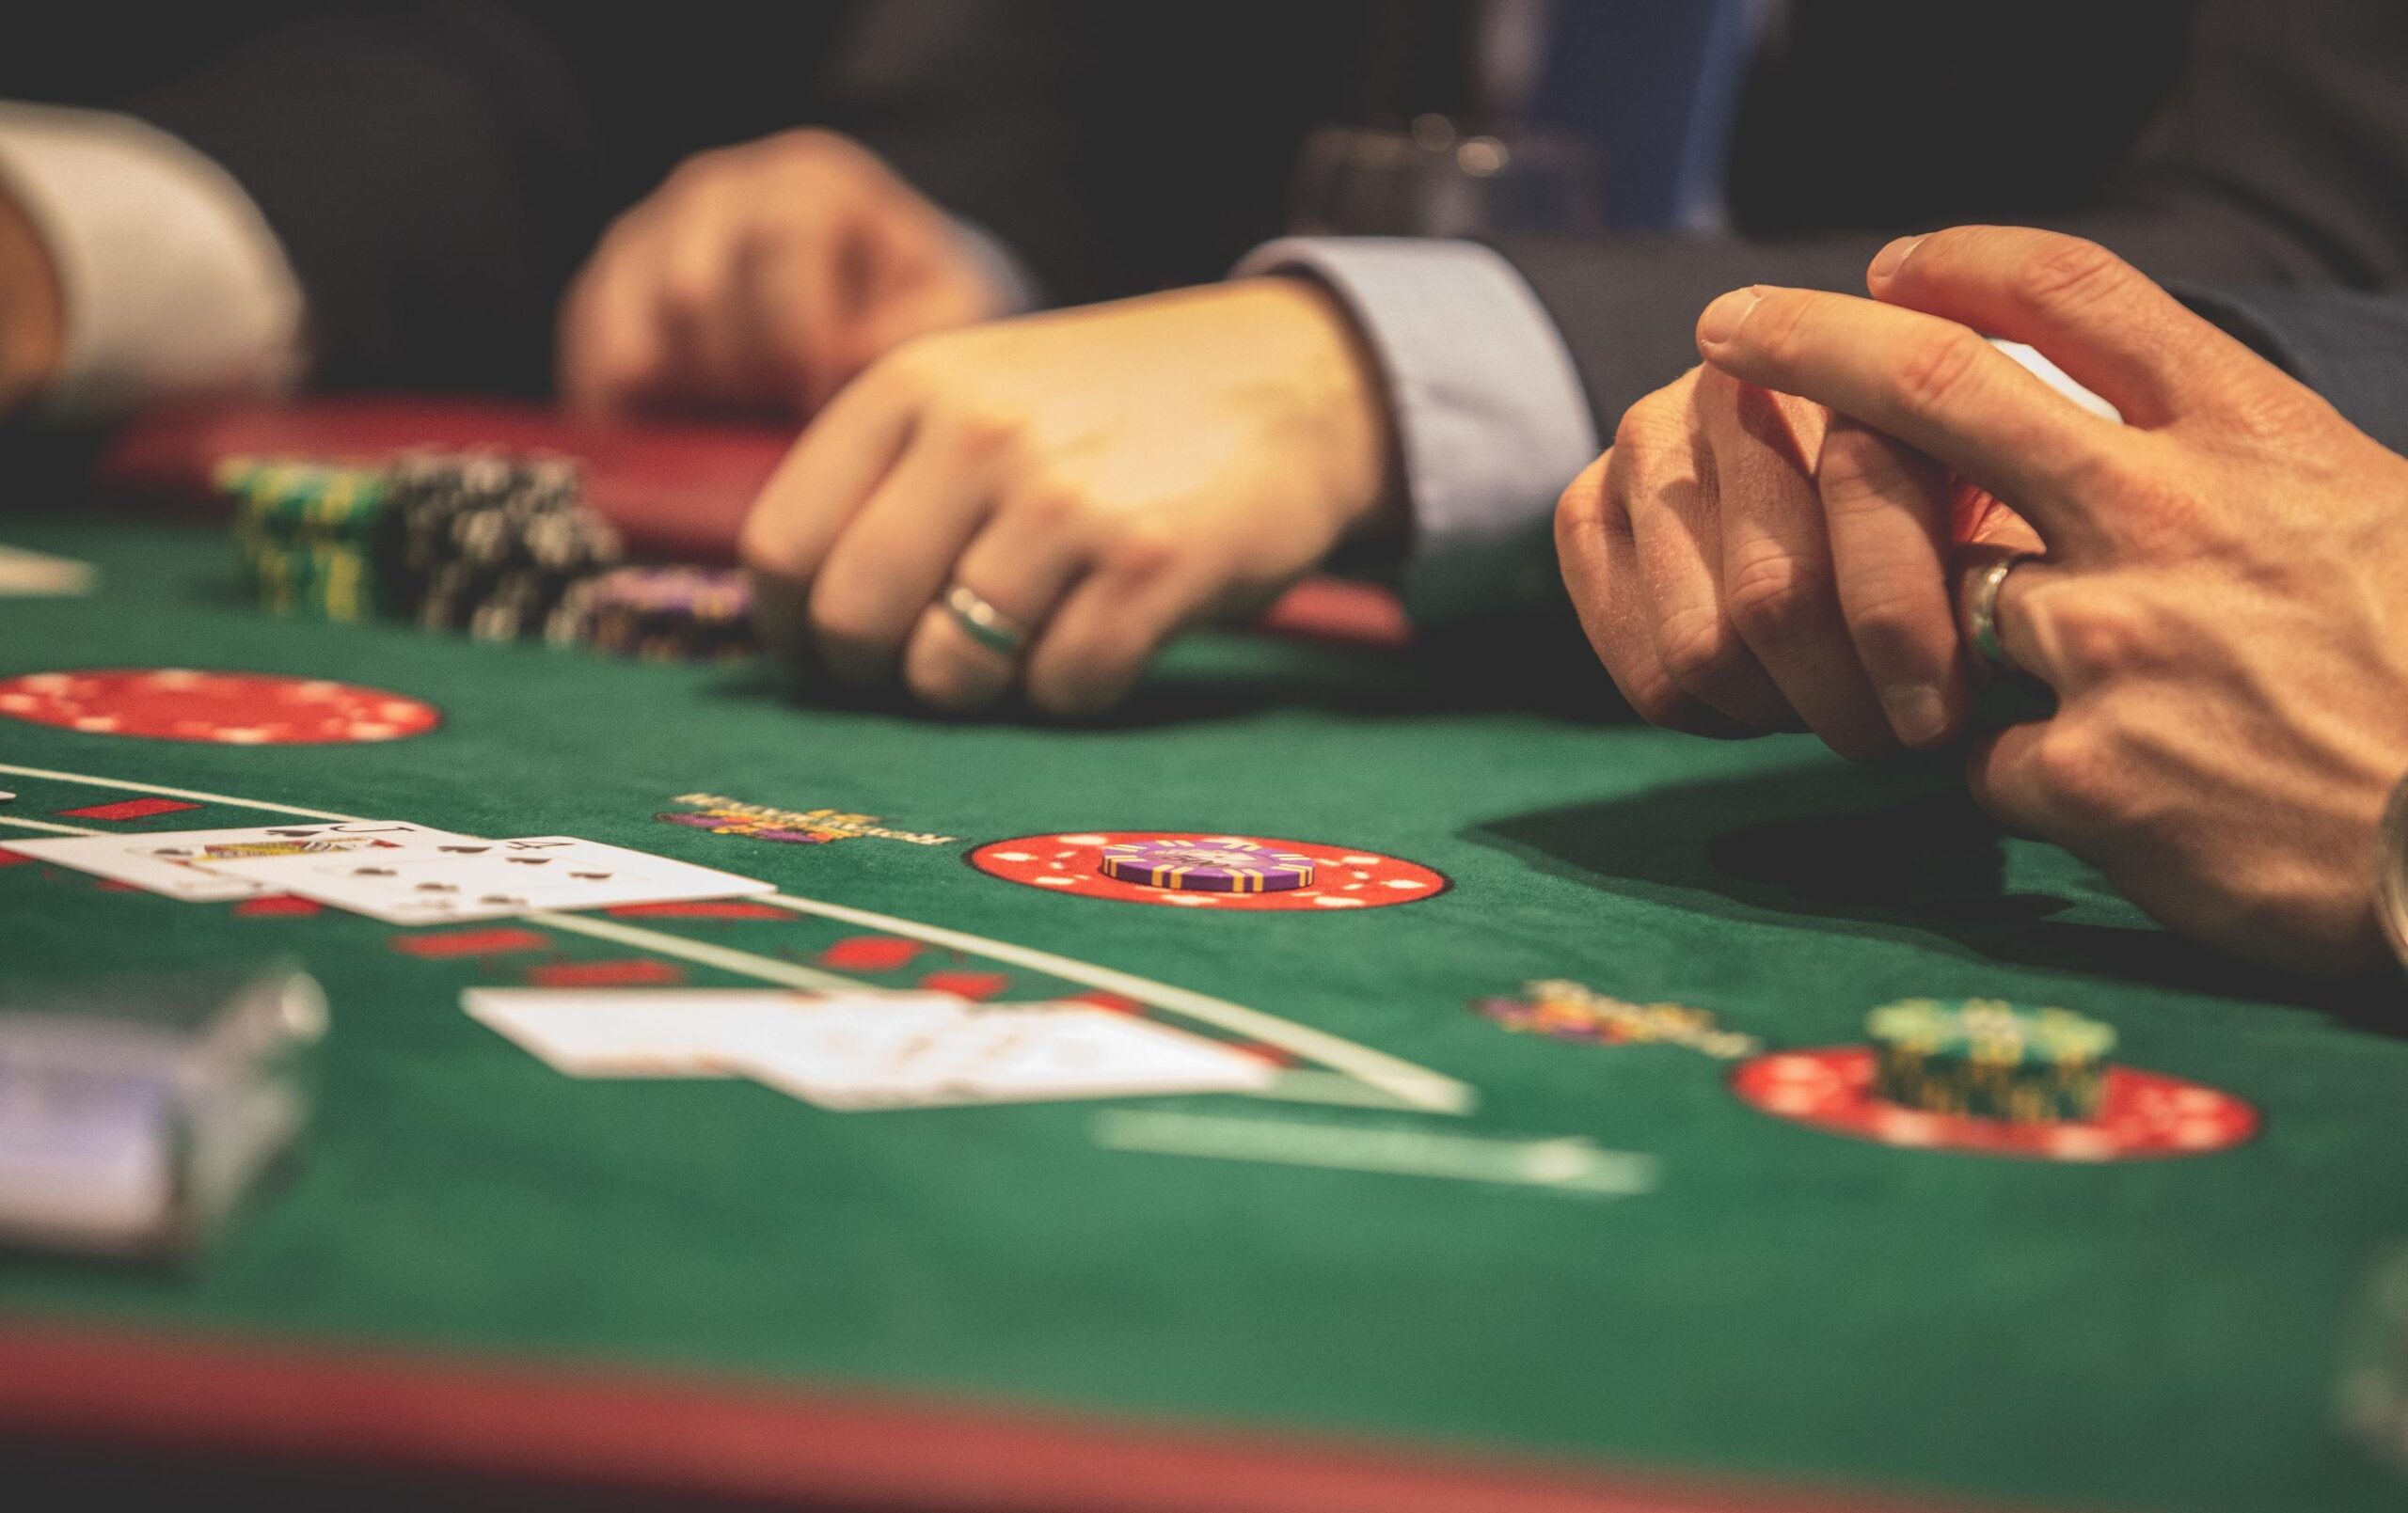 Which are the top 10 online casinos that offer the most immersive and realistic virtual reality (VR) poker experiences?